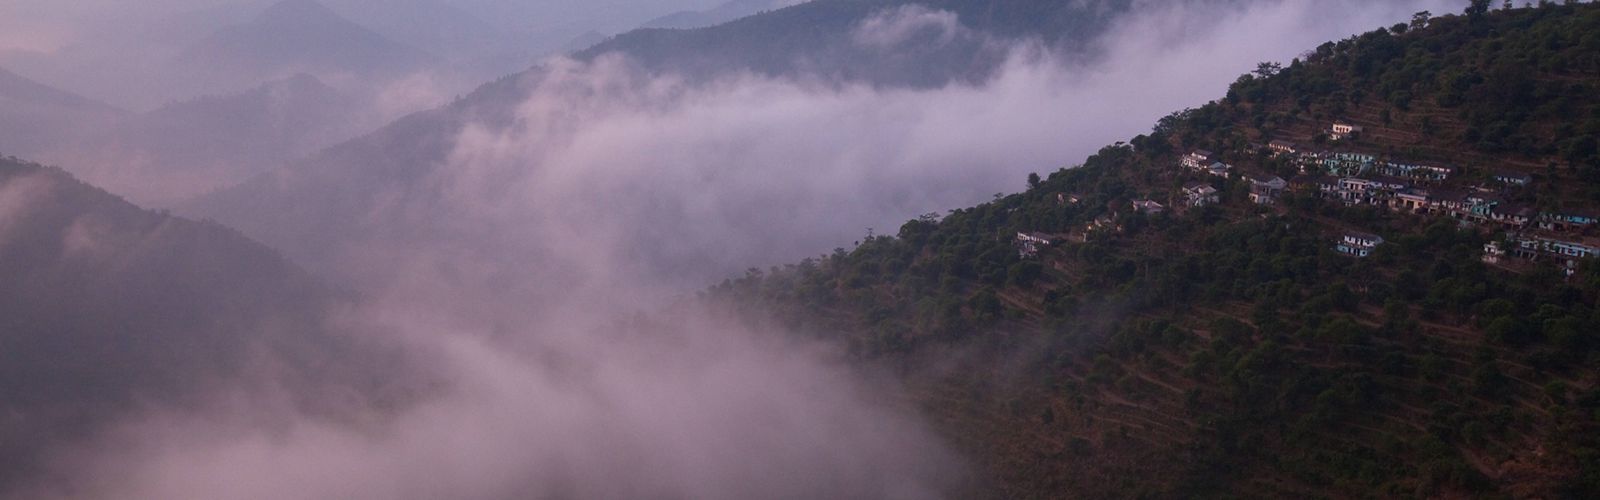 The morning clouds and fog lift off the small towns in the lower Himalaya mountains.